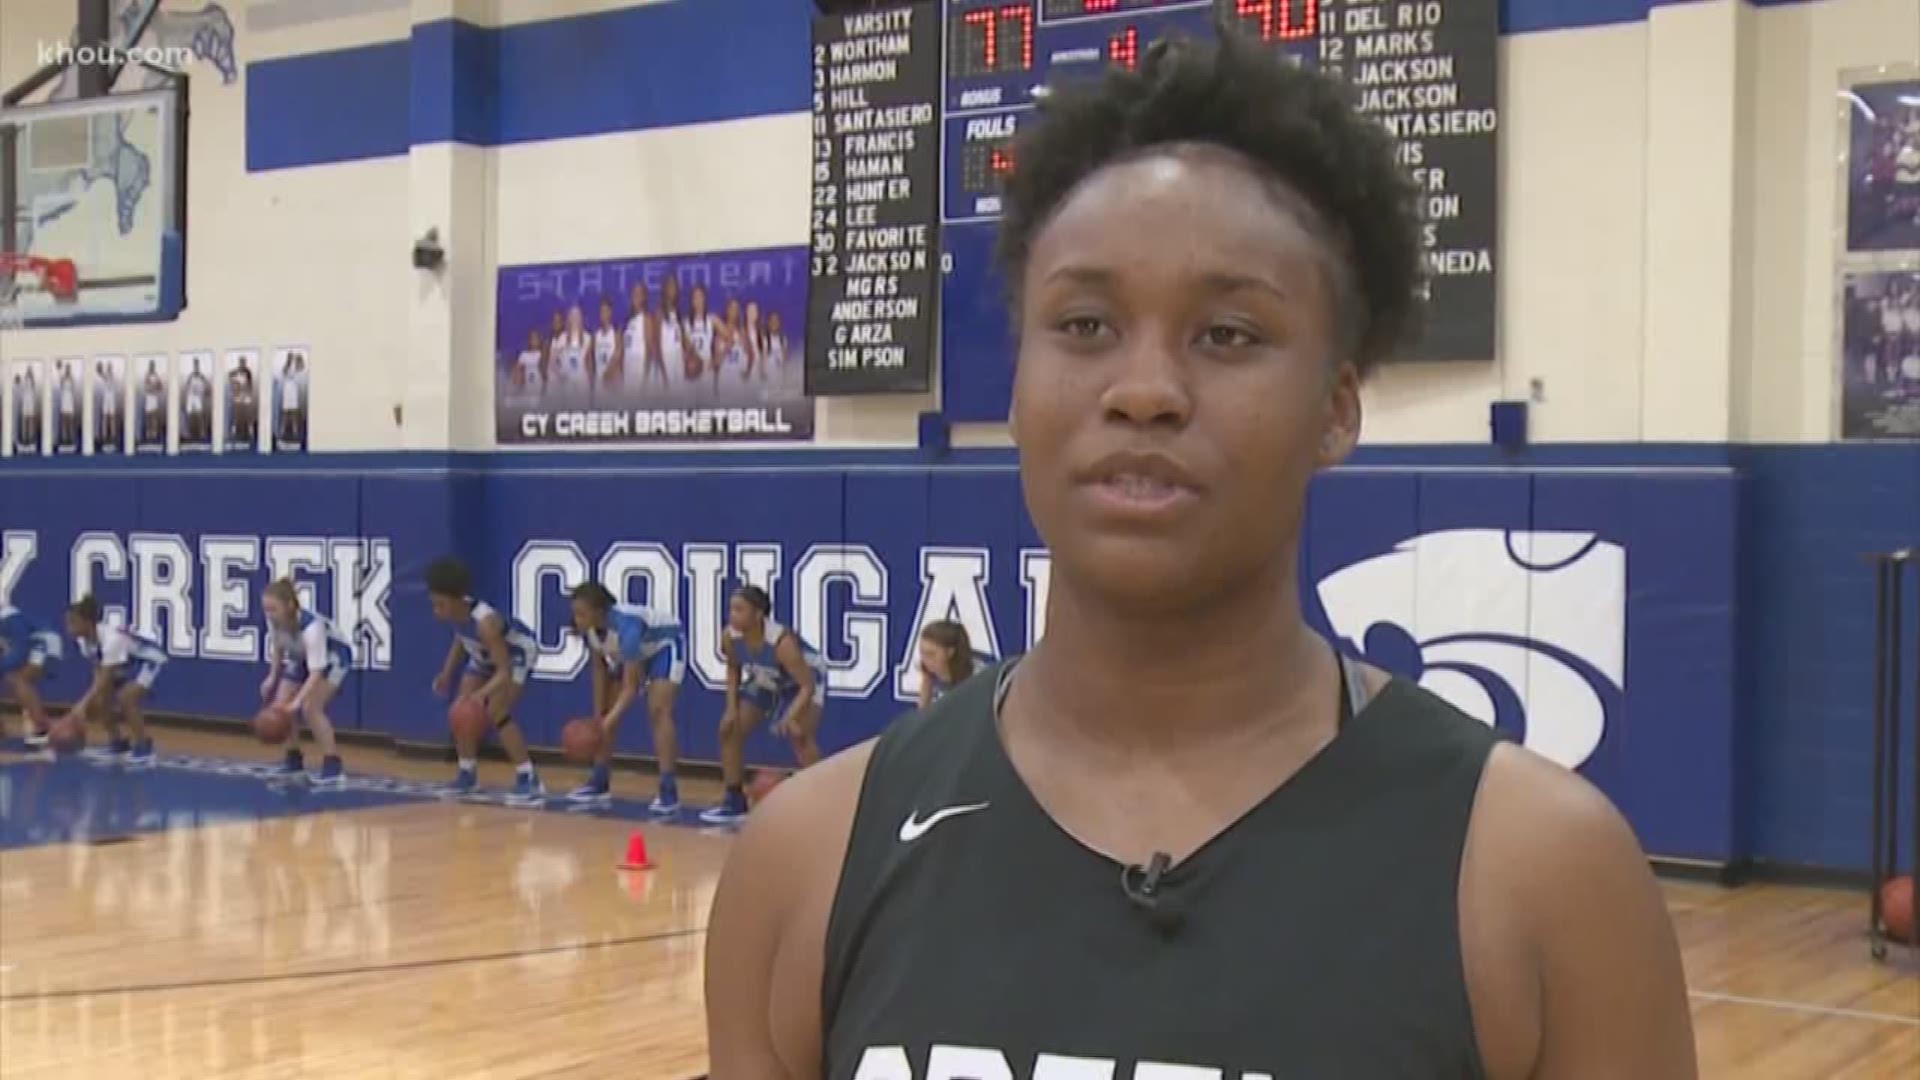 Taylor Jackson, who plays for the Cy Creek Cougars' undefeated girls' basketball team, is KHou 11's Athlete of the Week.